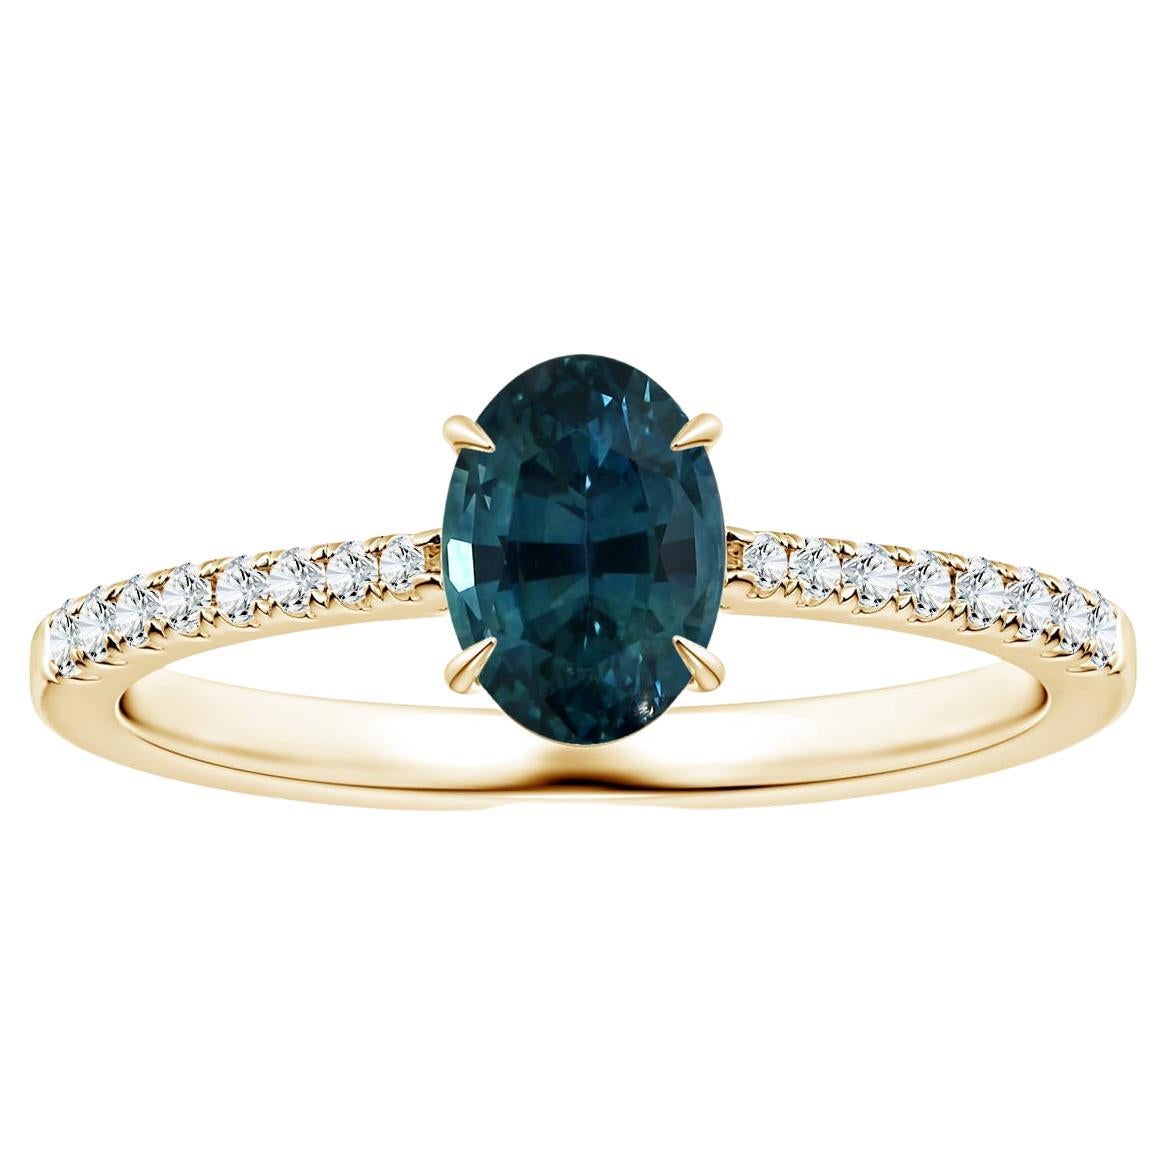 ANGARA GIA Certified Teal Sapphire Ring in Yellow Gold with Diamonds